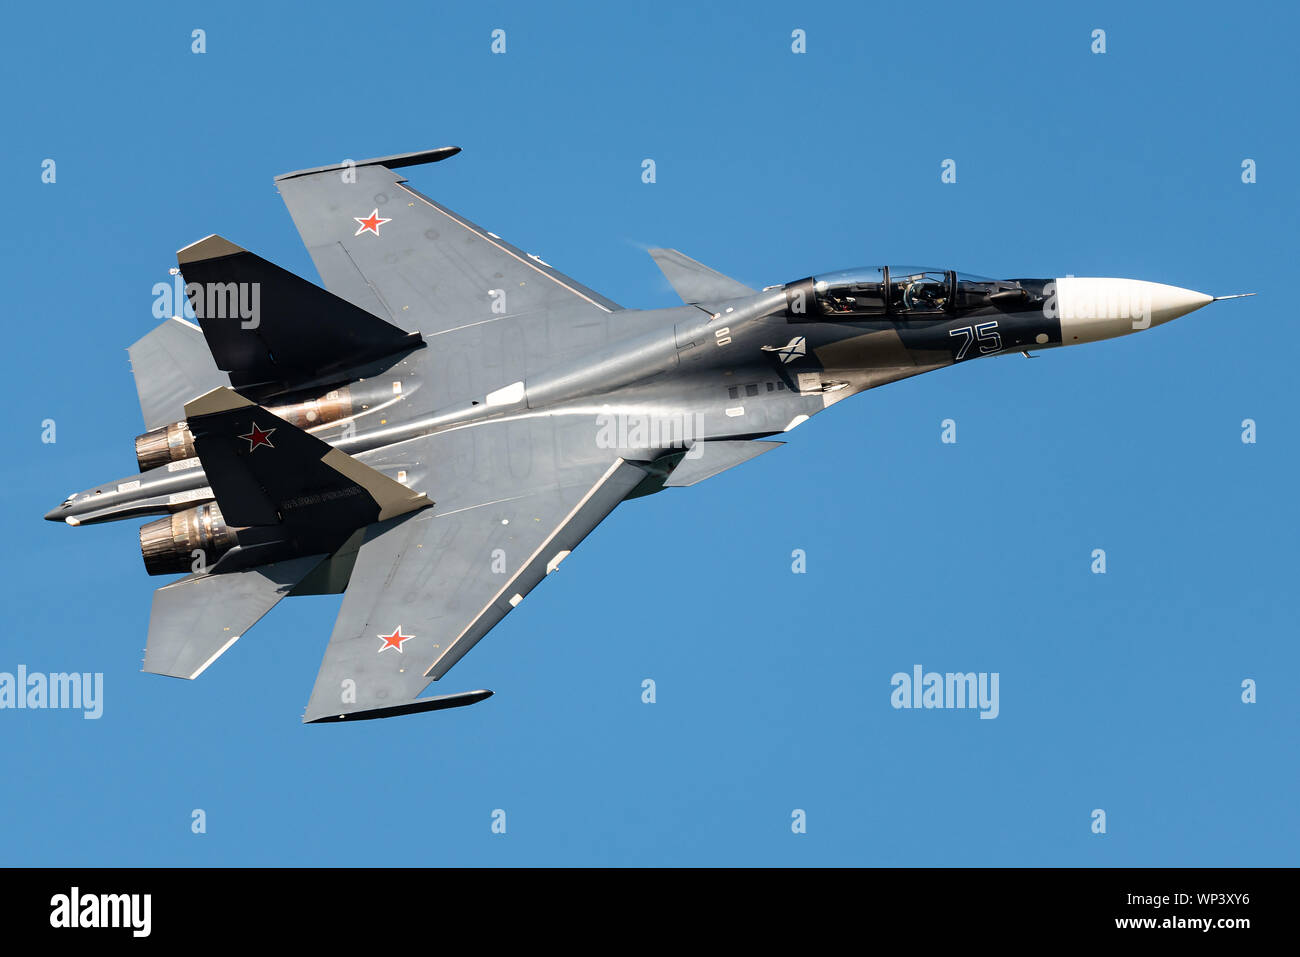 A Sukhoi Su-30SM two-seat supermaneuverable fighter jet of the Russian Navy at the MAKS 2019 airshow. Stock Photo